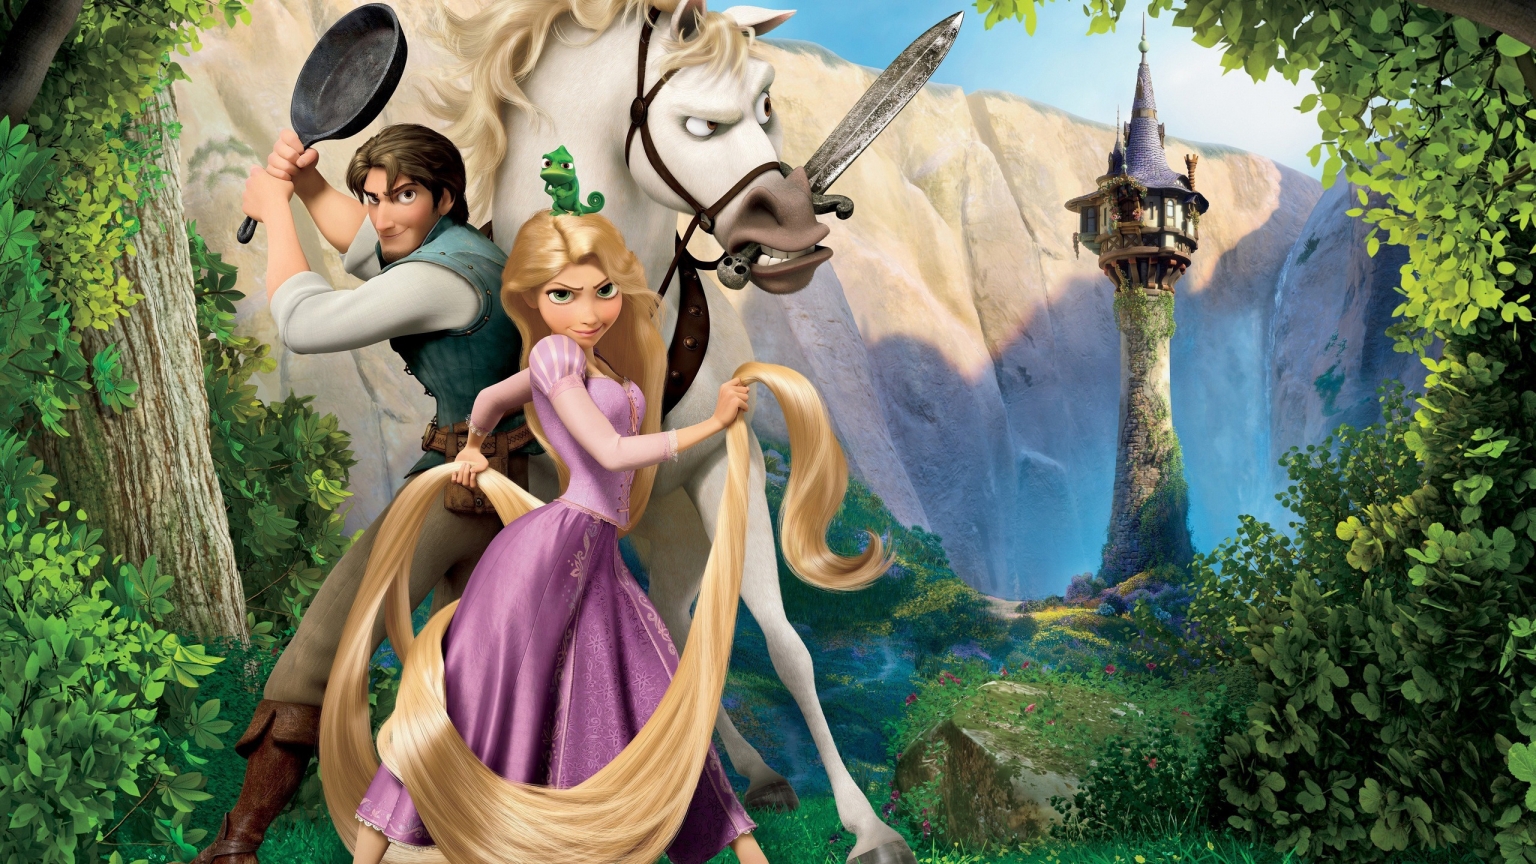 Tangled Animated Musical Film for 1536 x 864 HDTV resolution